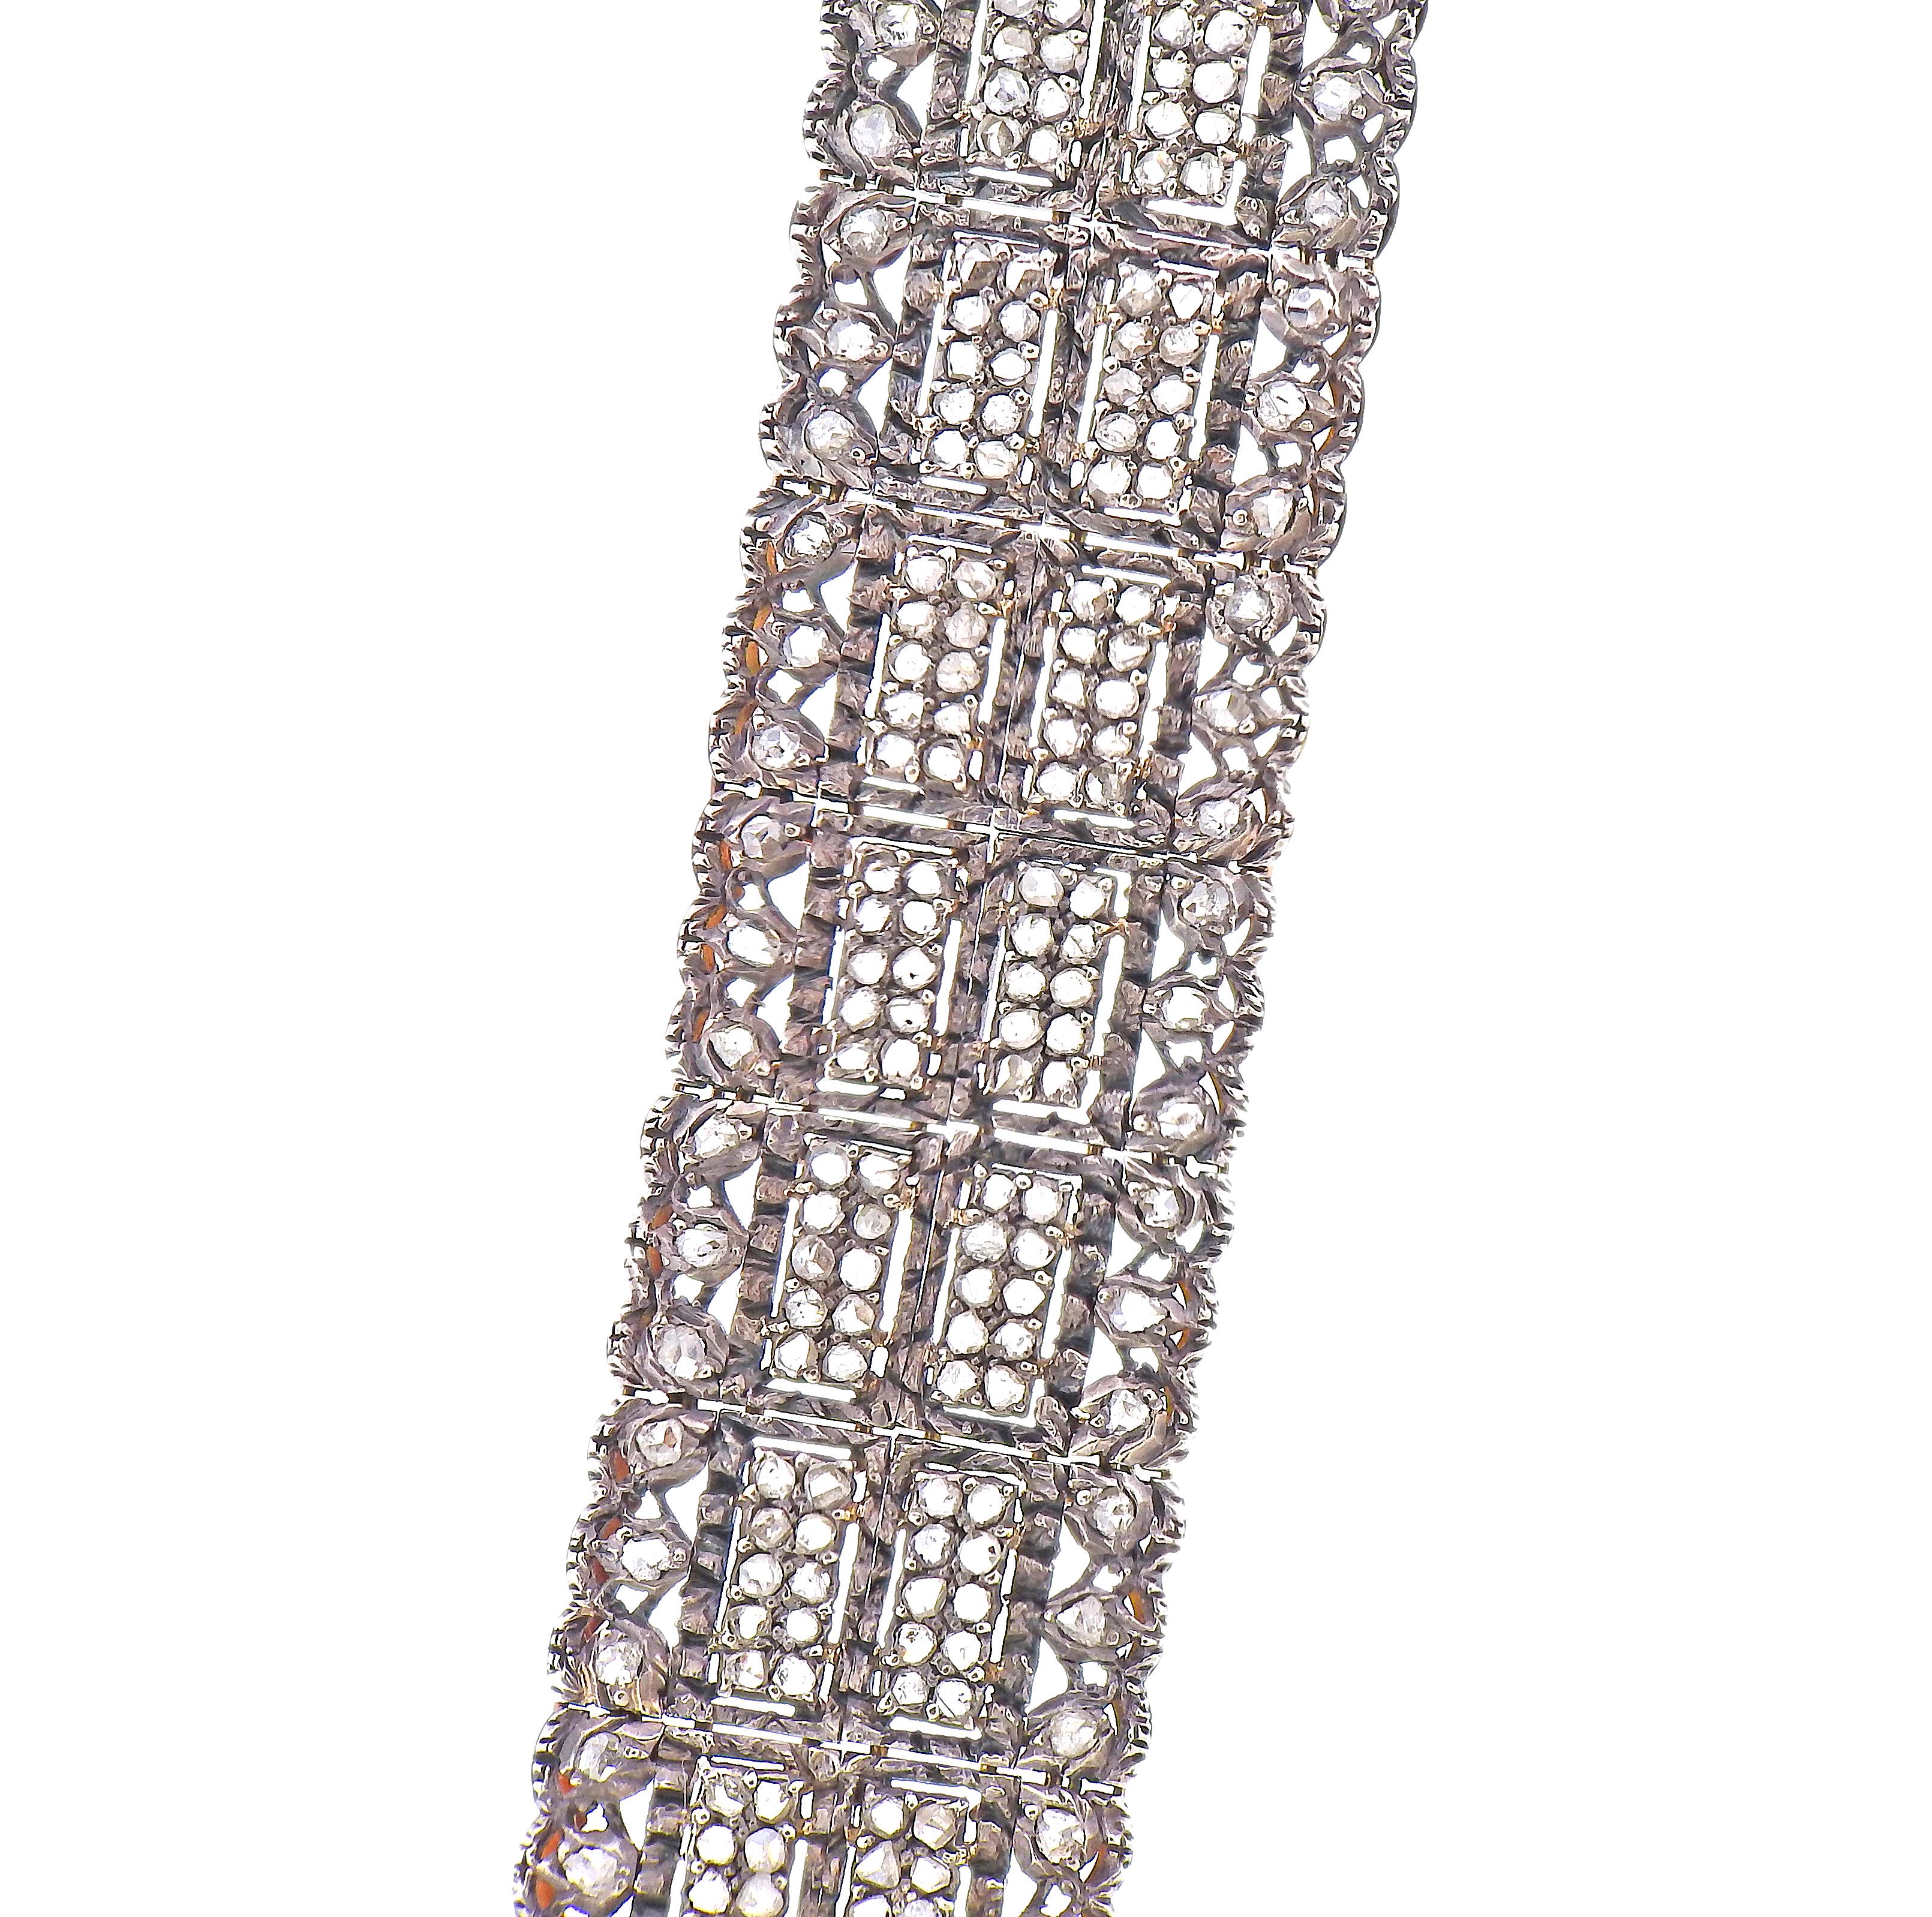 Vintage Mario Uccellati bracelet in silver and 18k gold, set with rose cut diamonds. Bracelet is 6 7/8